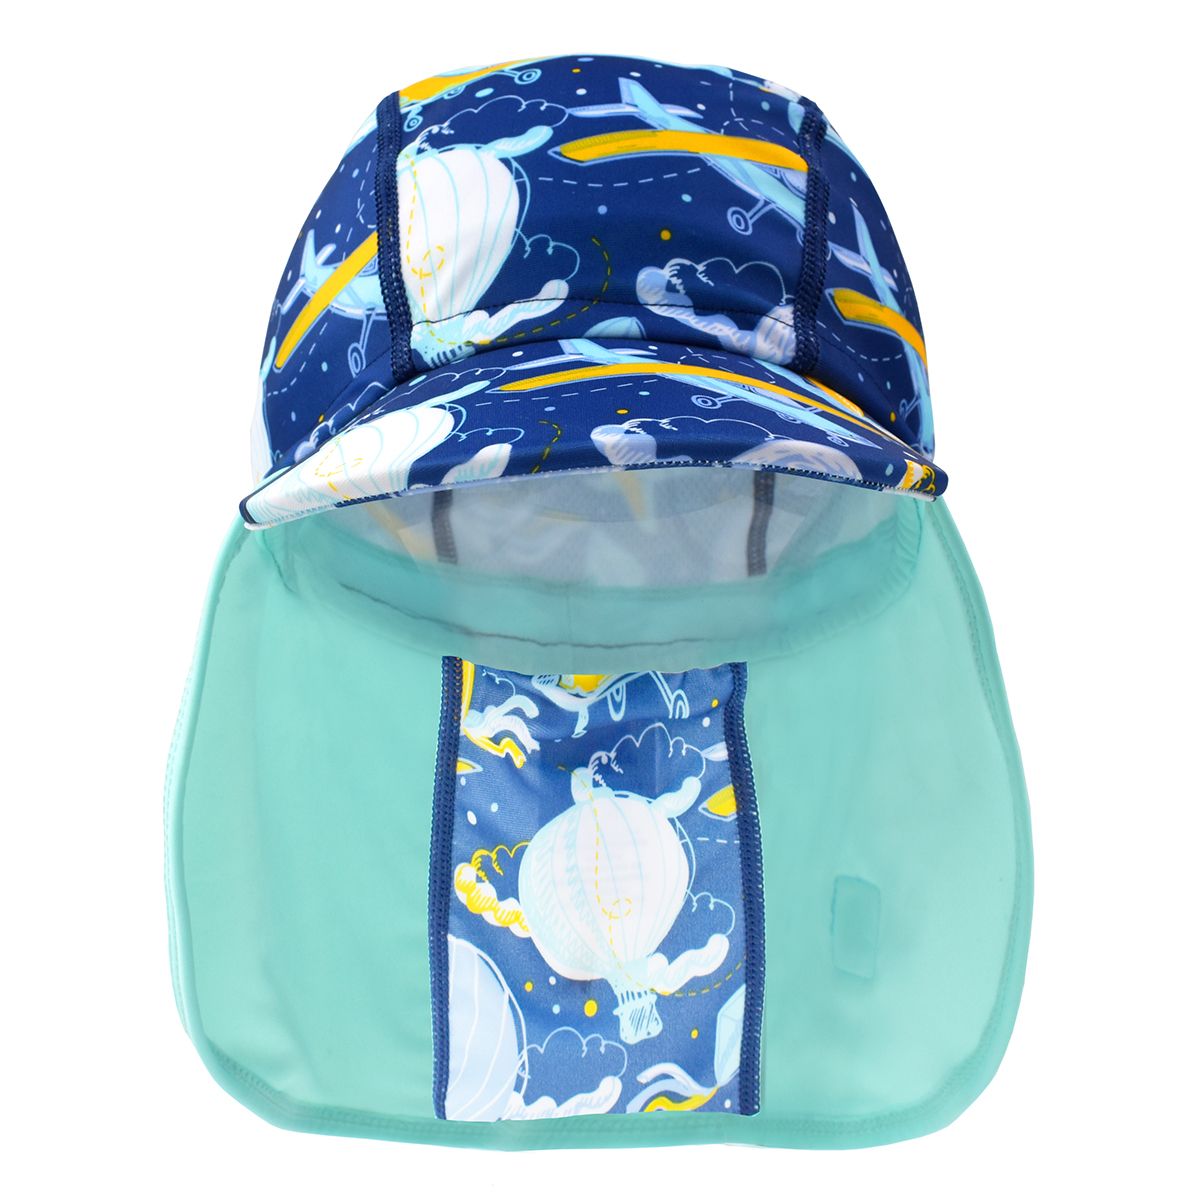 Legionnaire style sun hat in navy blue, with hot air balloons and airplanes themed print panel, including clouds and kites. Front.